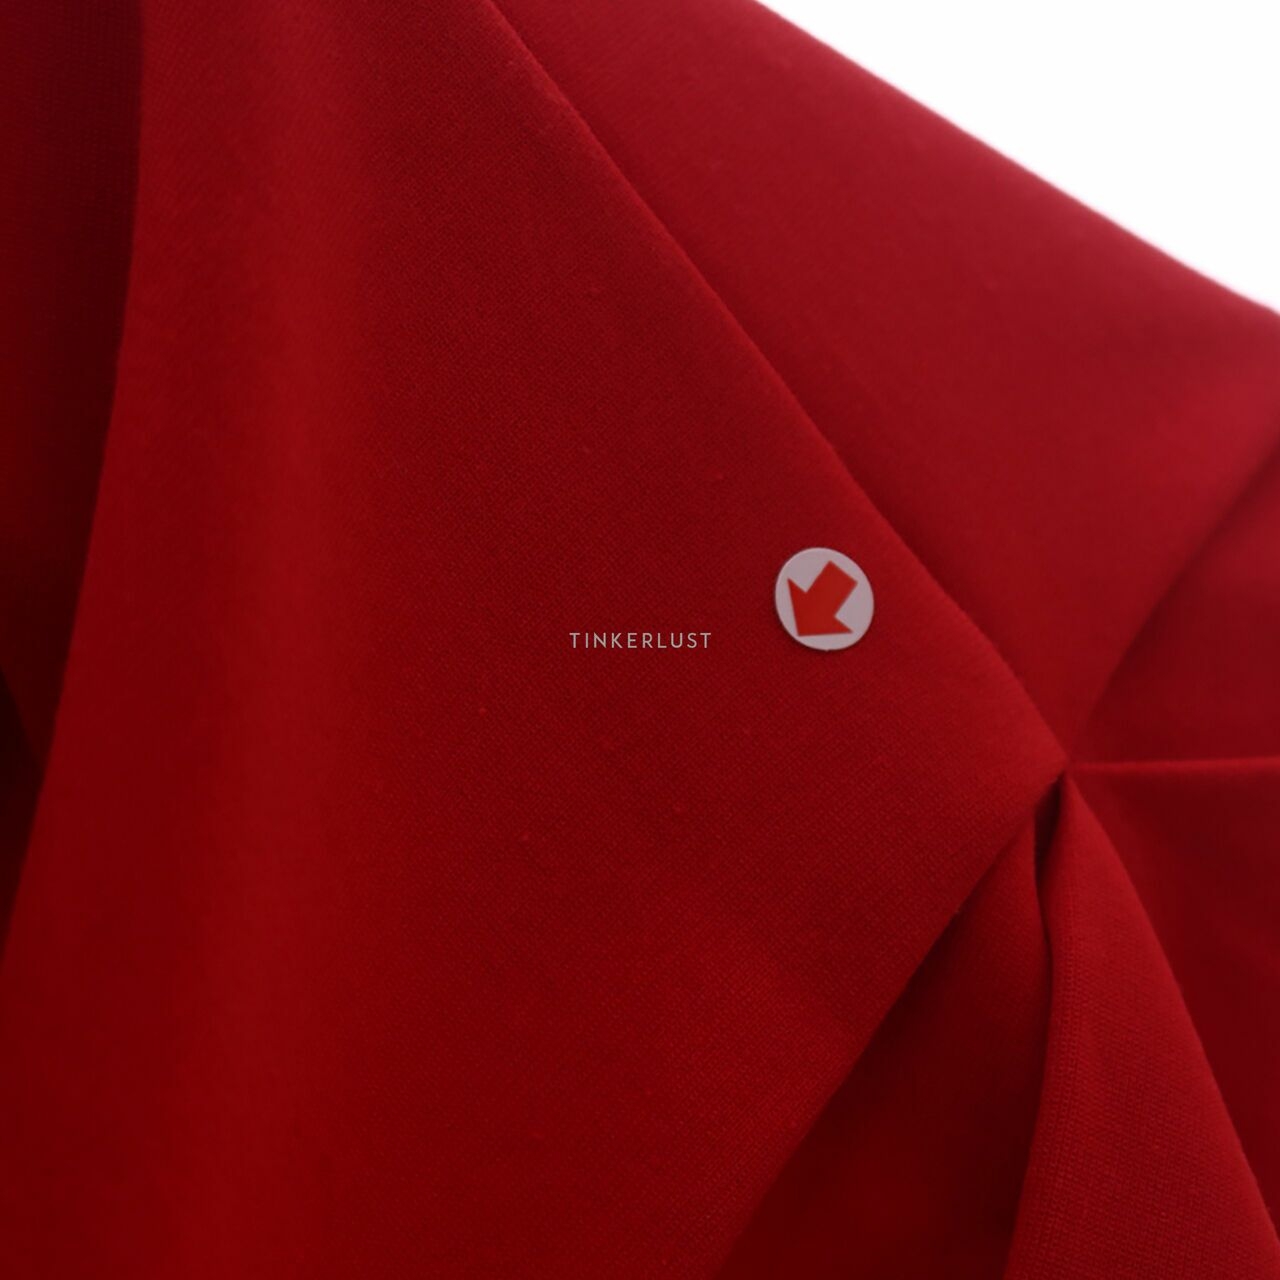 lacoste-live Red Polo Shirt